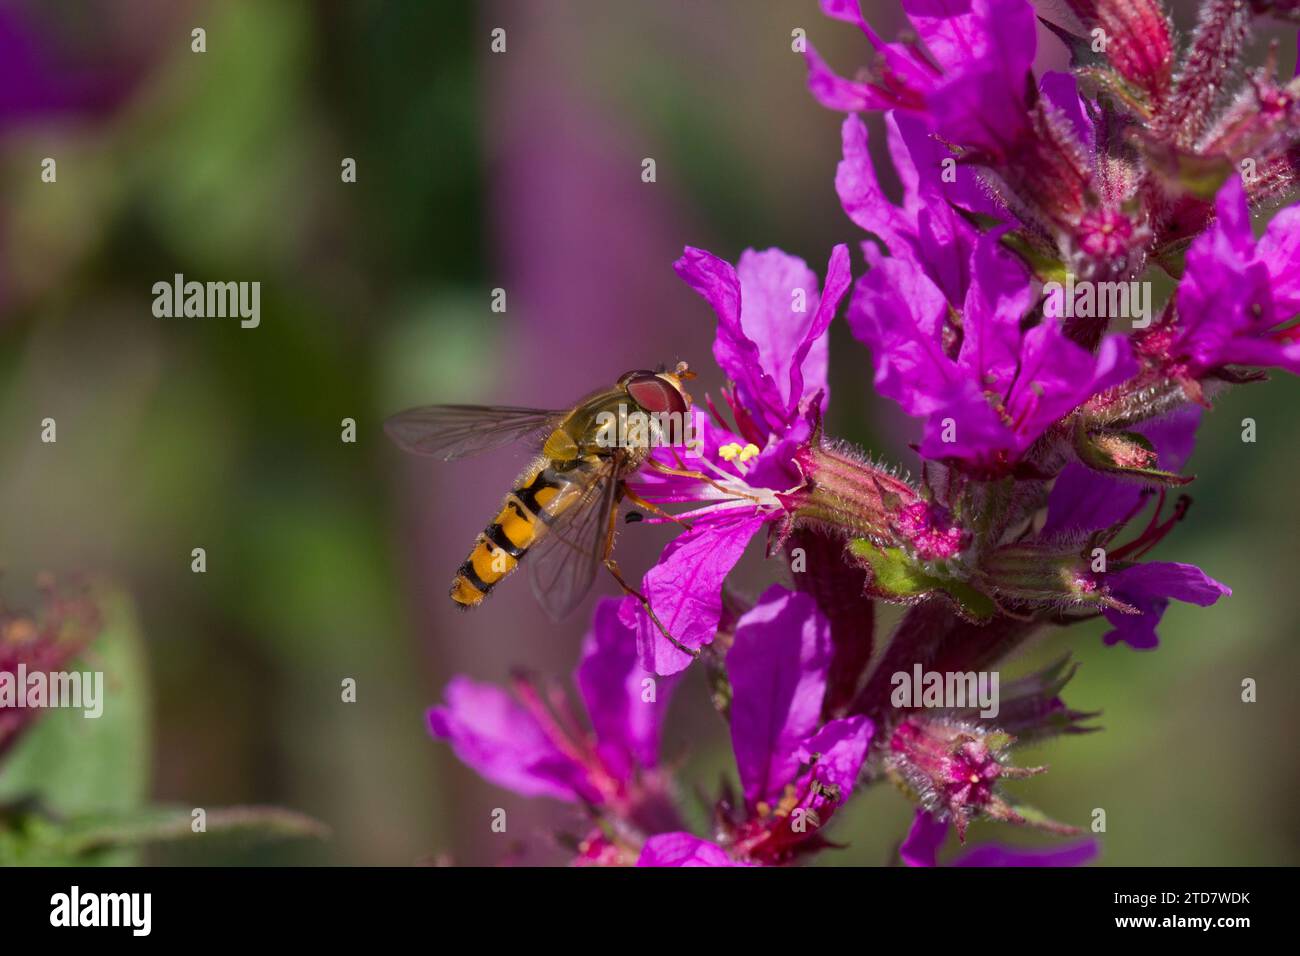 Hoverfly (syrphus ribesii) nctaring on Purple Loosestrife, Regno Unito Foto Stock